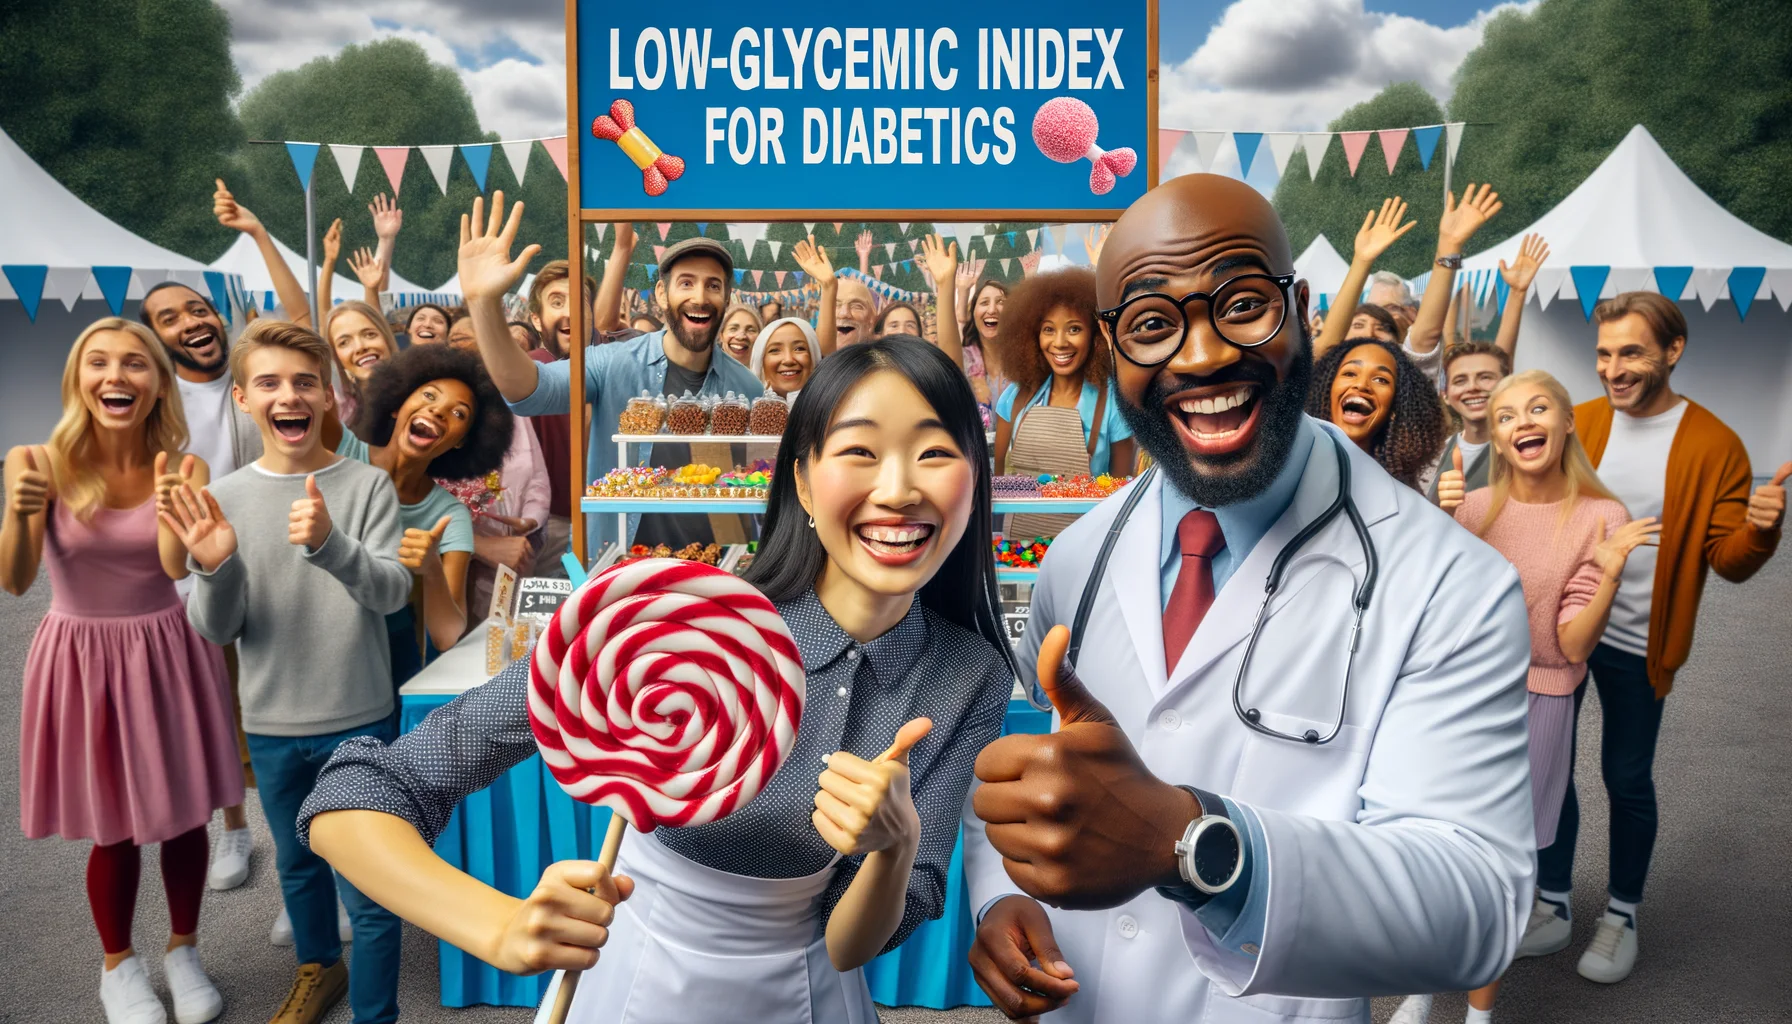 Create a comical, realistic scene of an outdoor health fair in full swing. Excited crowd of diverse ethnicities and genders is gathered around a brightly decorated stall labeled 'Low-Glycemic Index Sweets for Diabetics'. The Asian female stall owner, with a radiant smile, is presenting an enormous, fancy, sugar-free lollipop, cause of much amusement. To her side, a Black male nutritionist, wearing glasses and a lab coat, is giving thumbs up, having a hearty laugh. Sense of lightness, humor, and delight should permeate the scene while still maintaining the seriousness of the health topic.